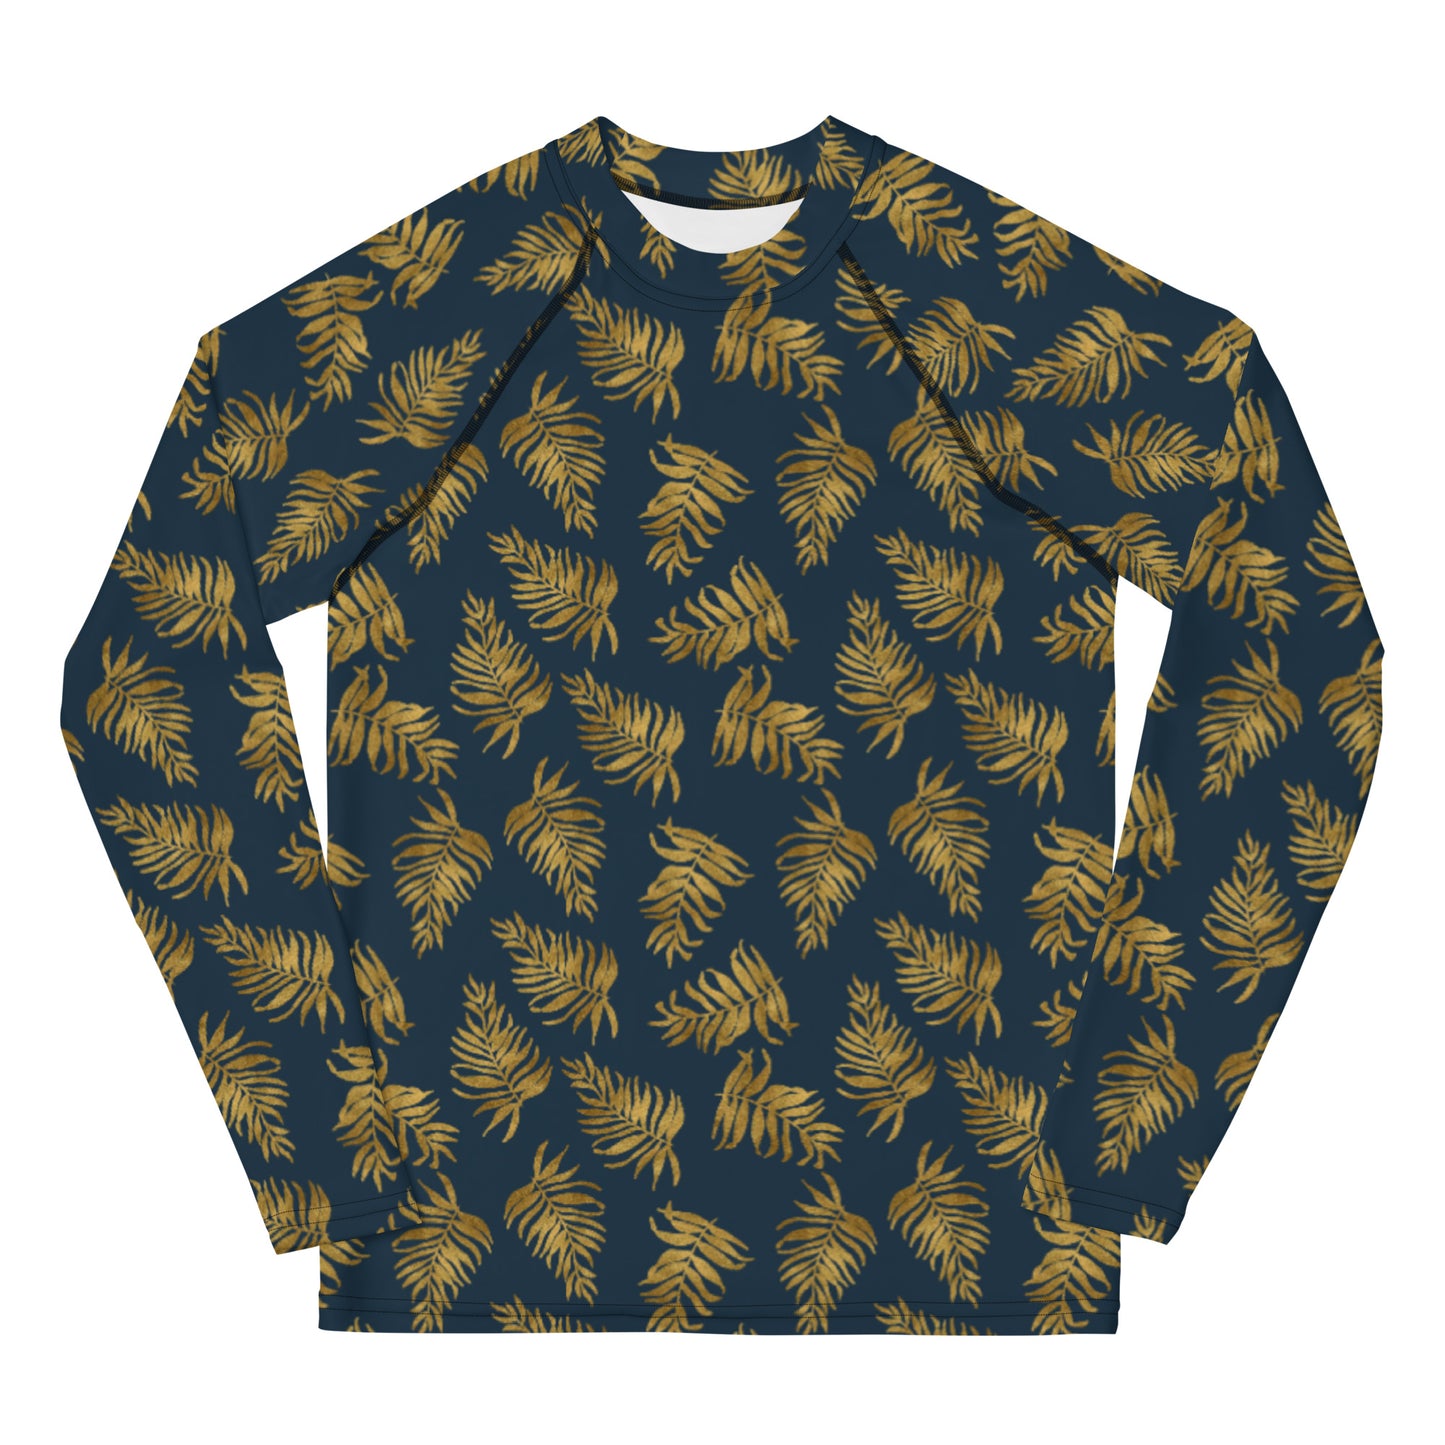 Youth Rash Guard - Palm Leaves in Slate and Gold